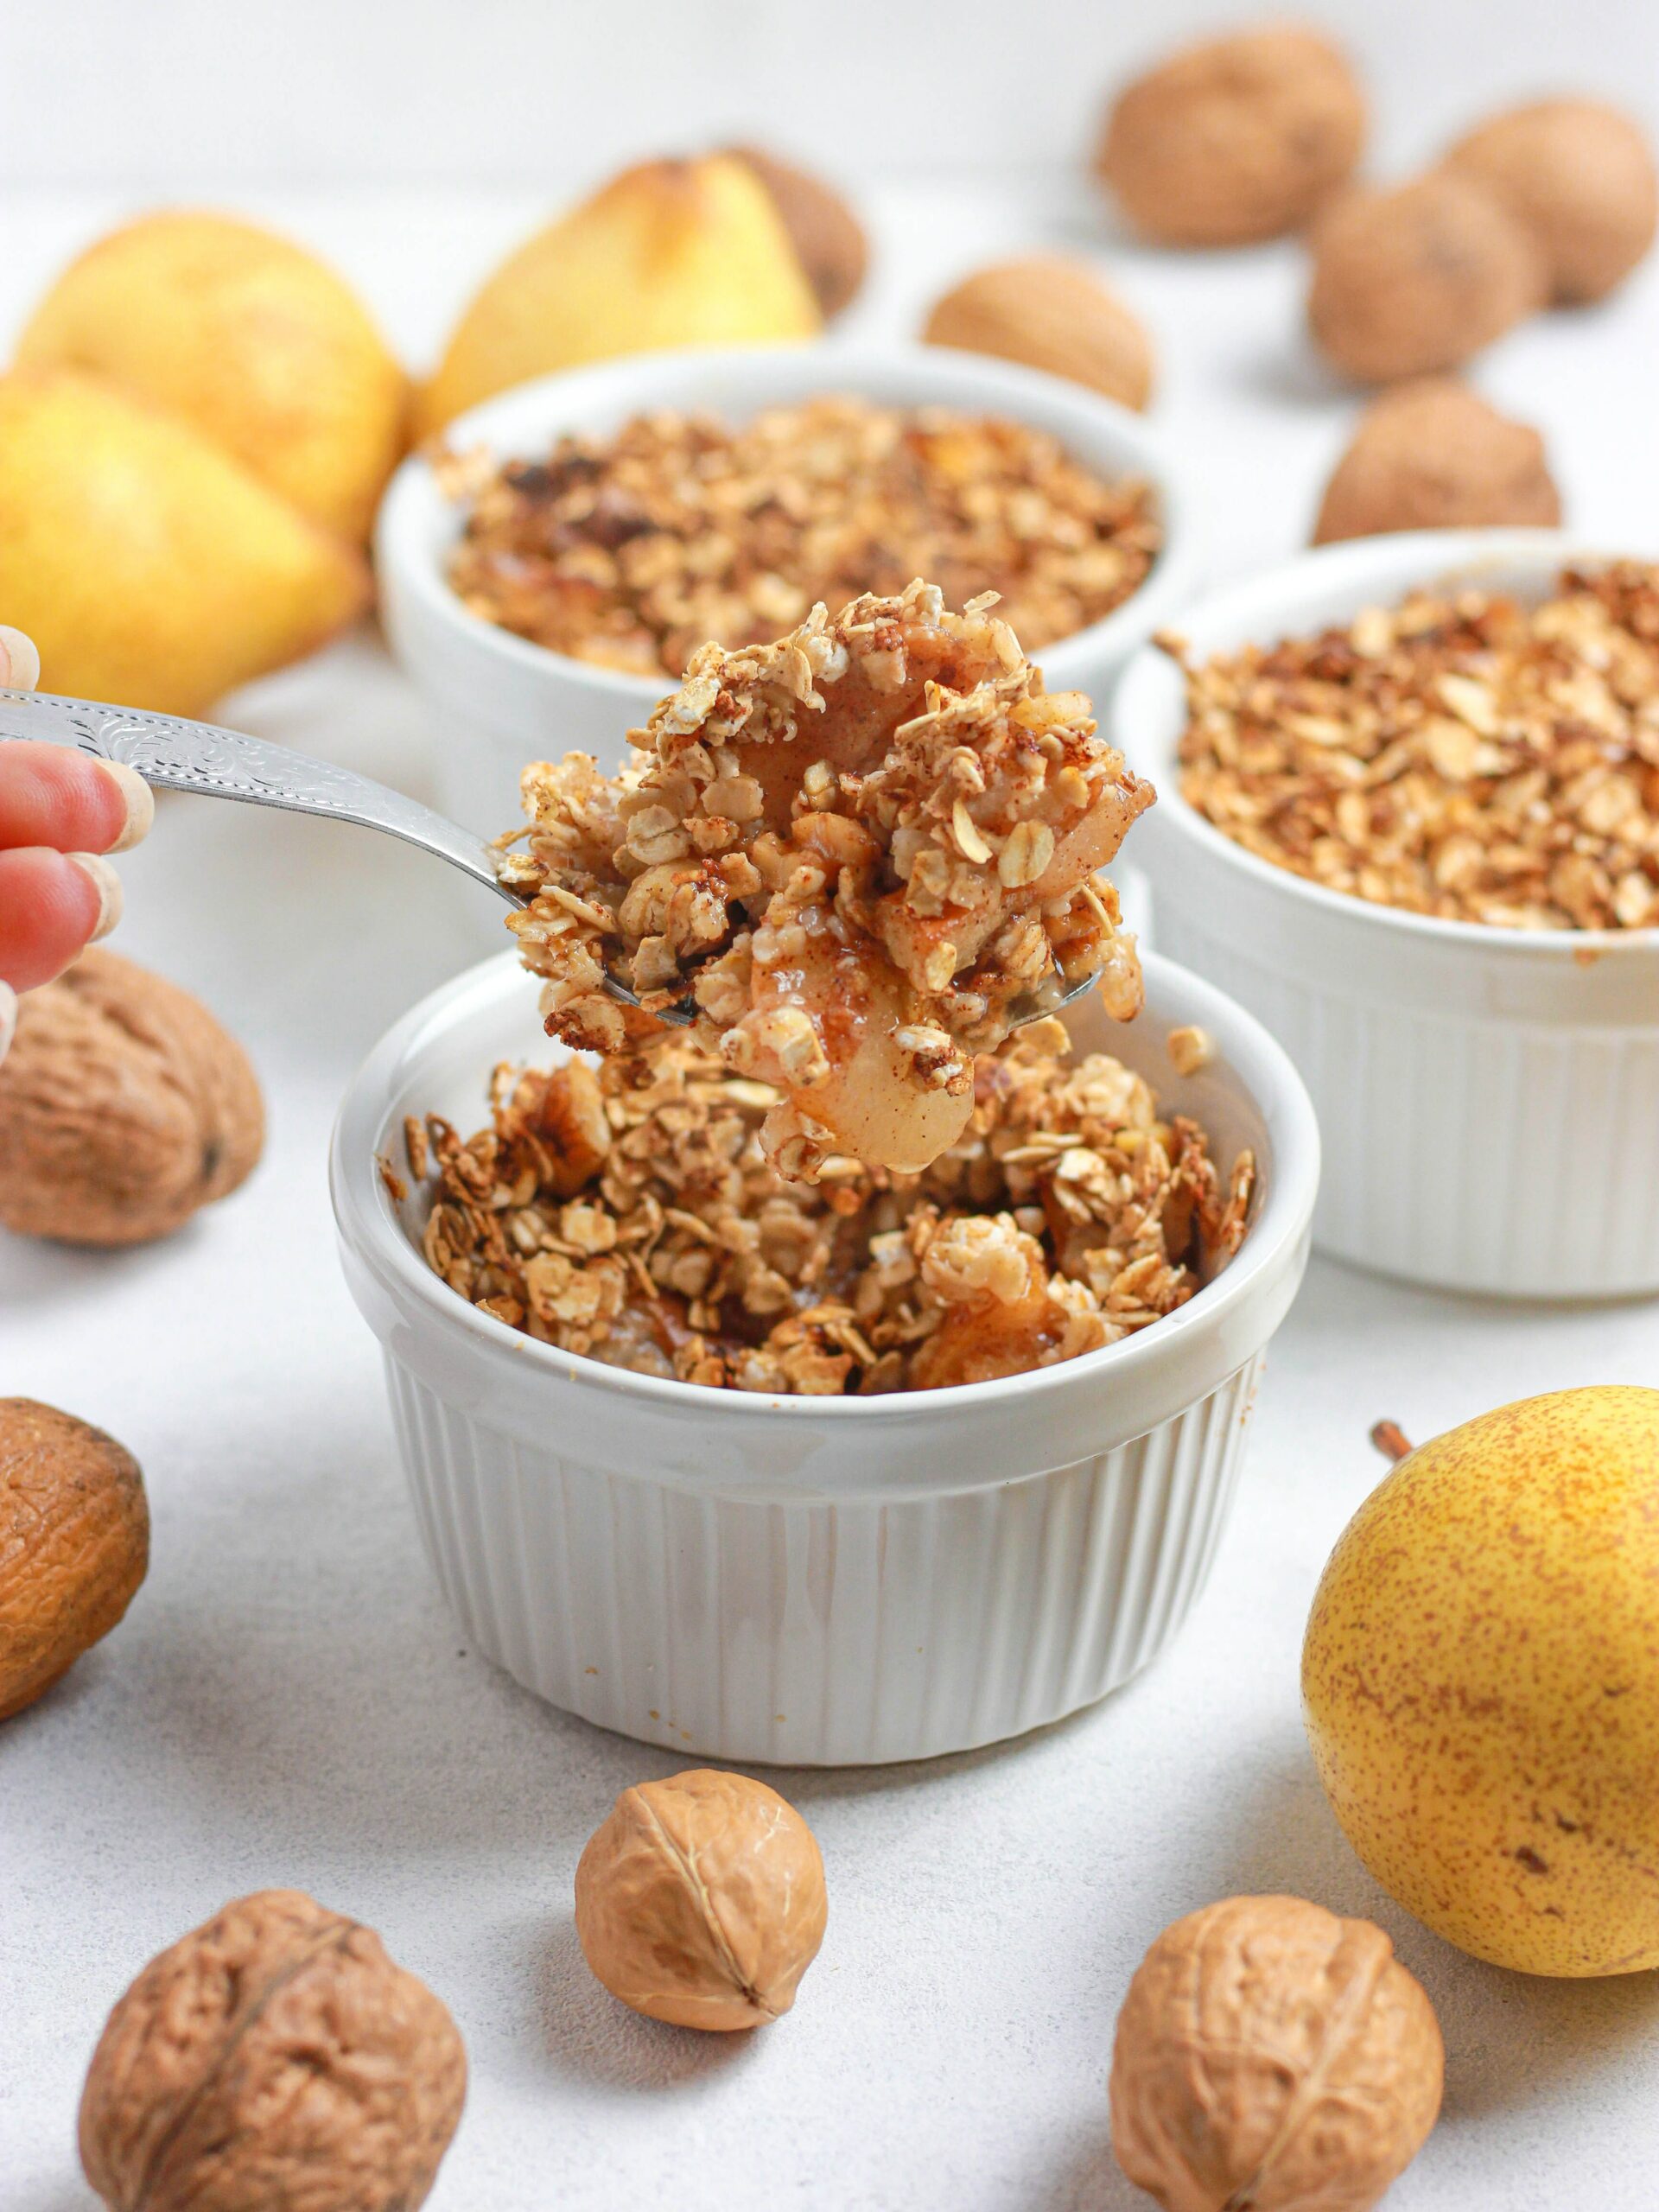 Pear and walnut crumble